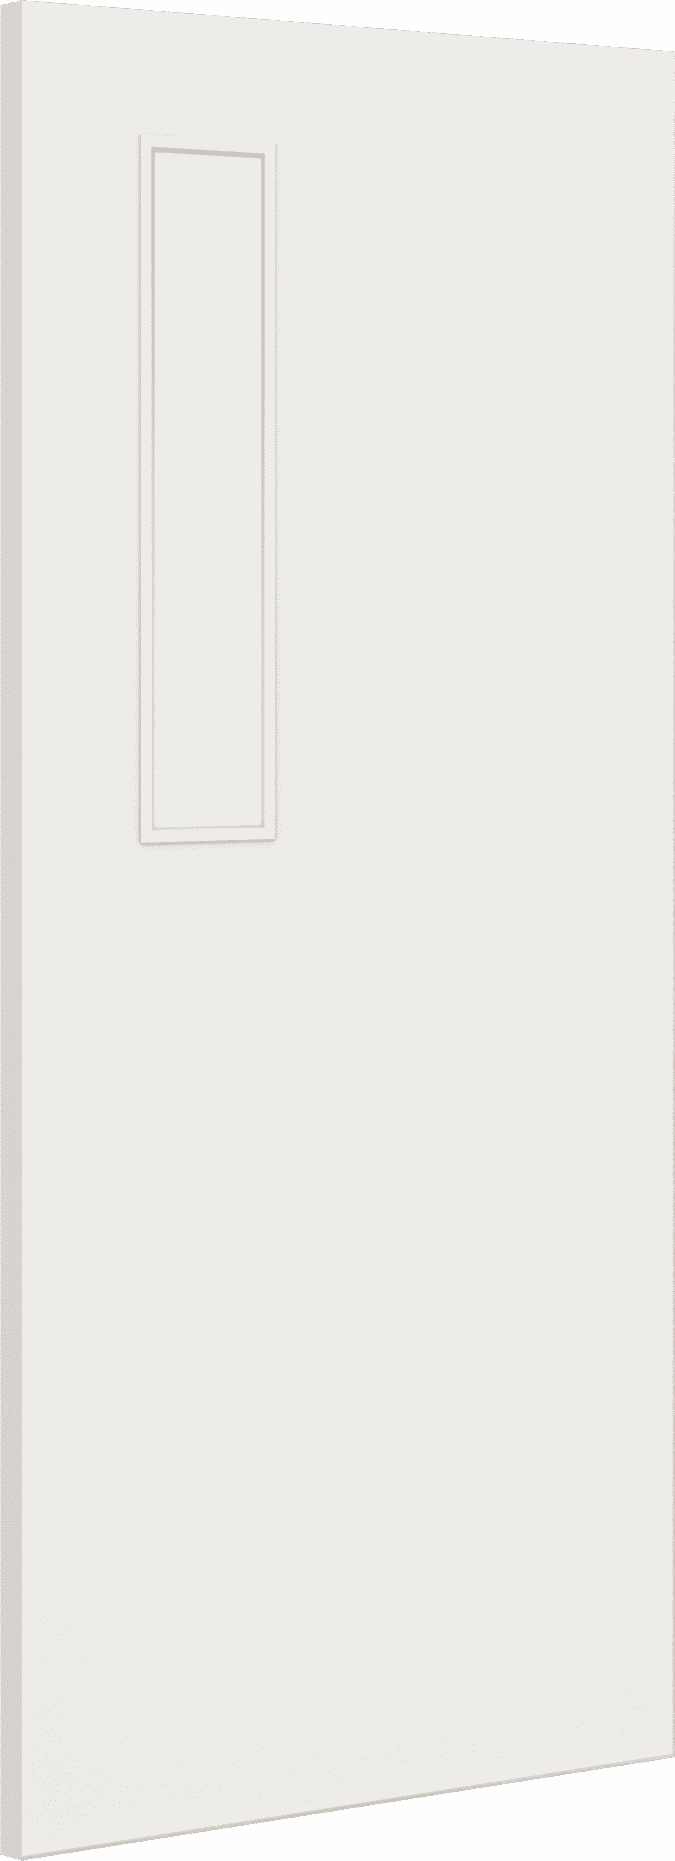 2040mm x 826mm x 44mm Architectural Paint Grade White 08 Clear Glazed Fire Door Blank